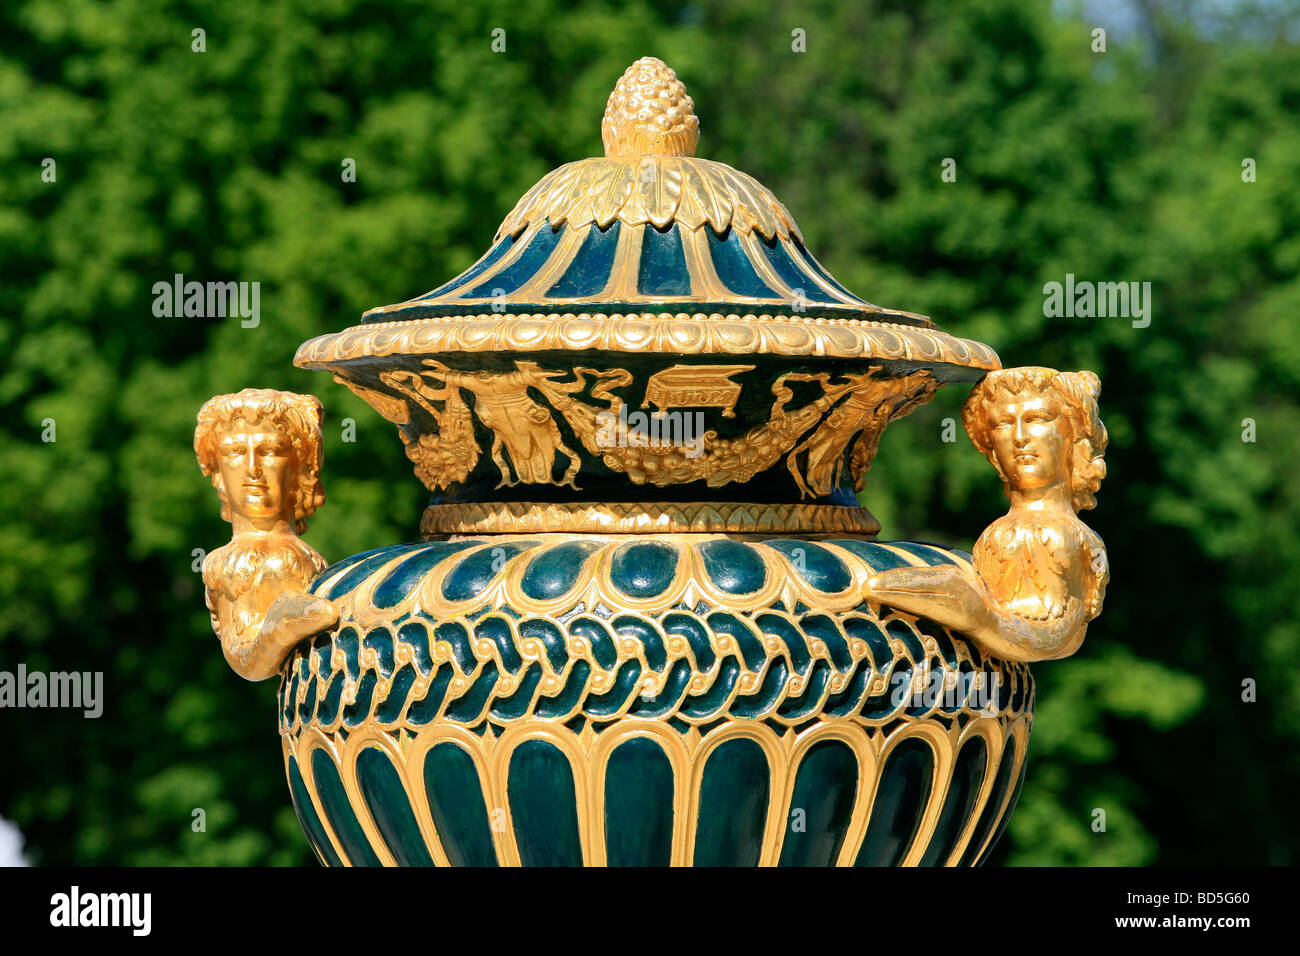 Decorated vase with handles in the Upper Gardens at the 18th century Peterhof in Saint Petersburg, Russia Stock Photo